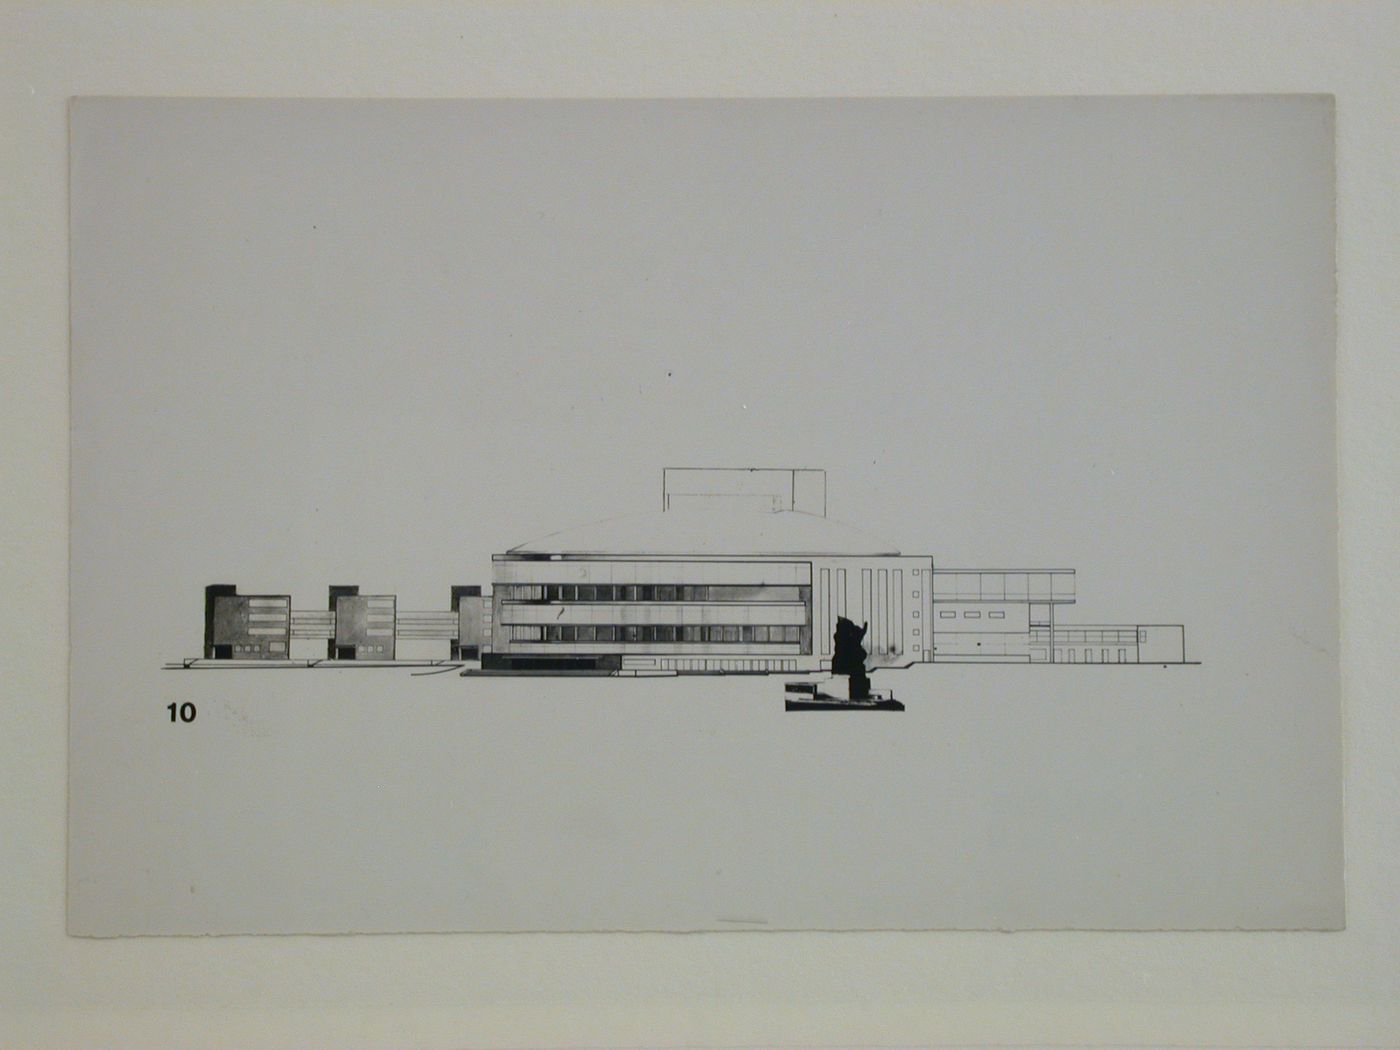 Photograph of an elevation for a competition [?] for a Massed Musical Performance Theater, Kharkov, Soviet Union (now in Ukraine)